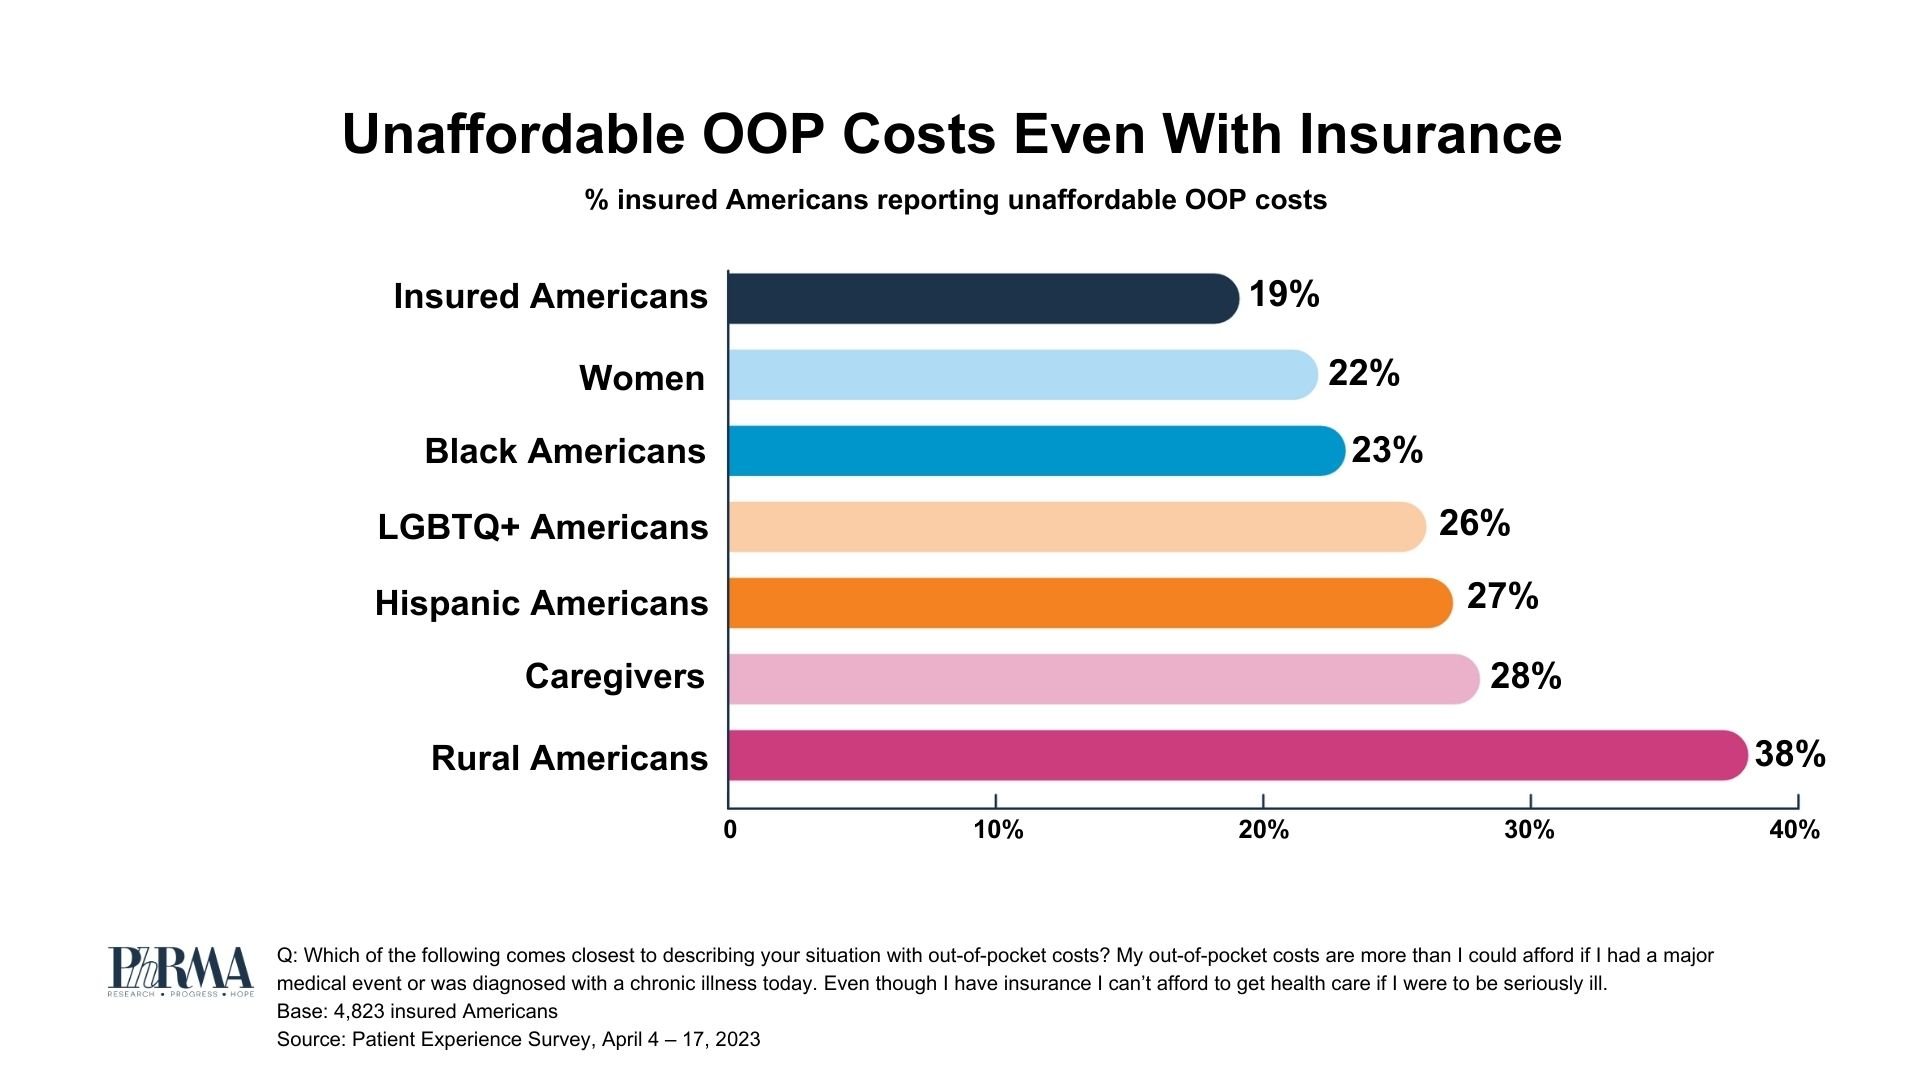 Unaffordable OOP Costs Even With Insurance